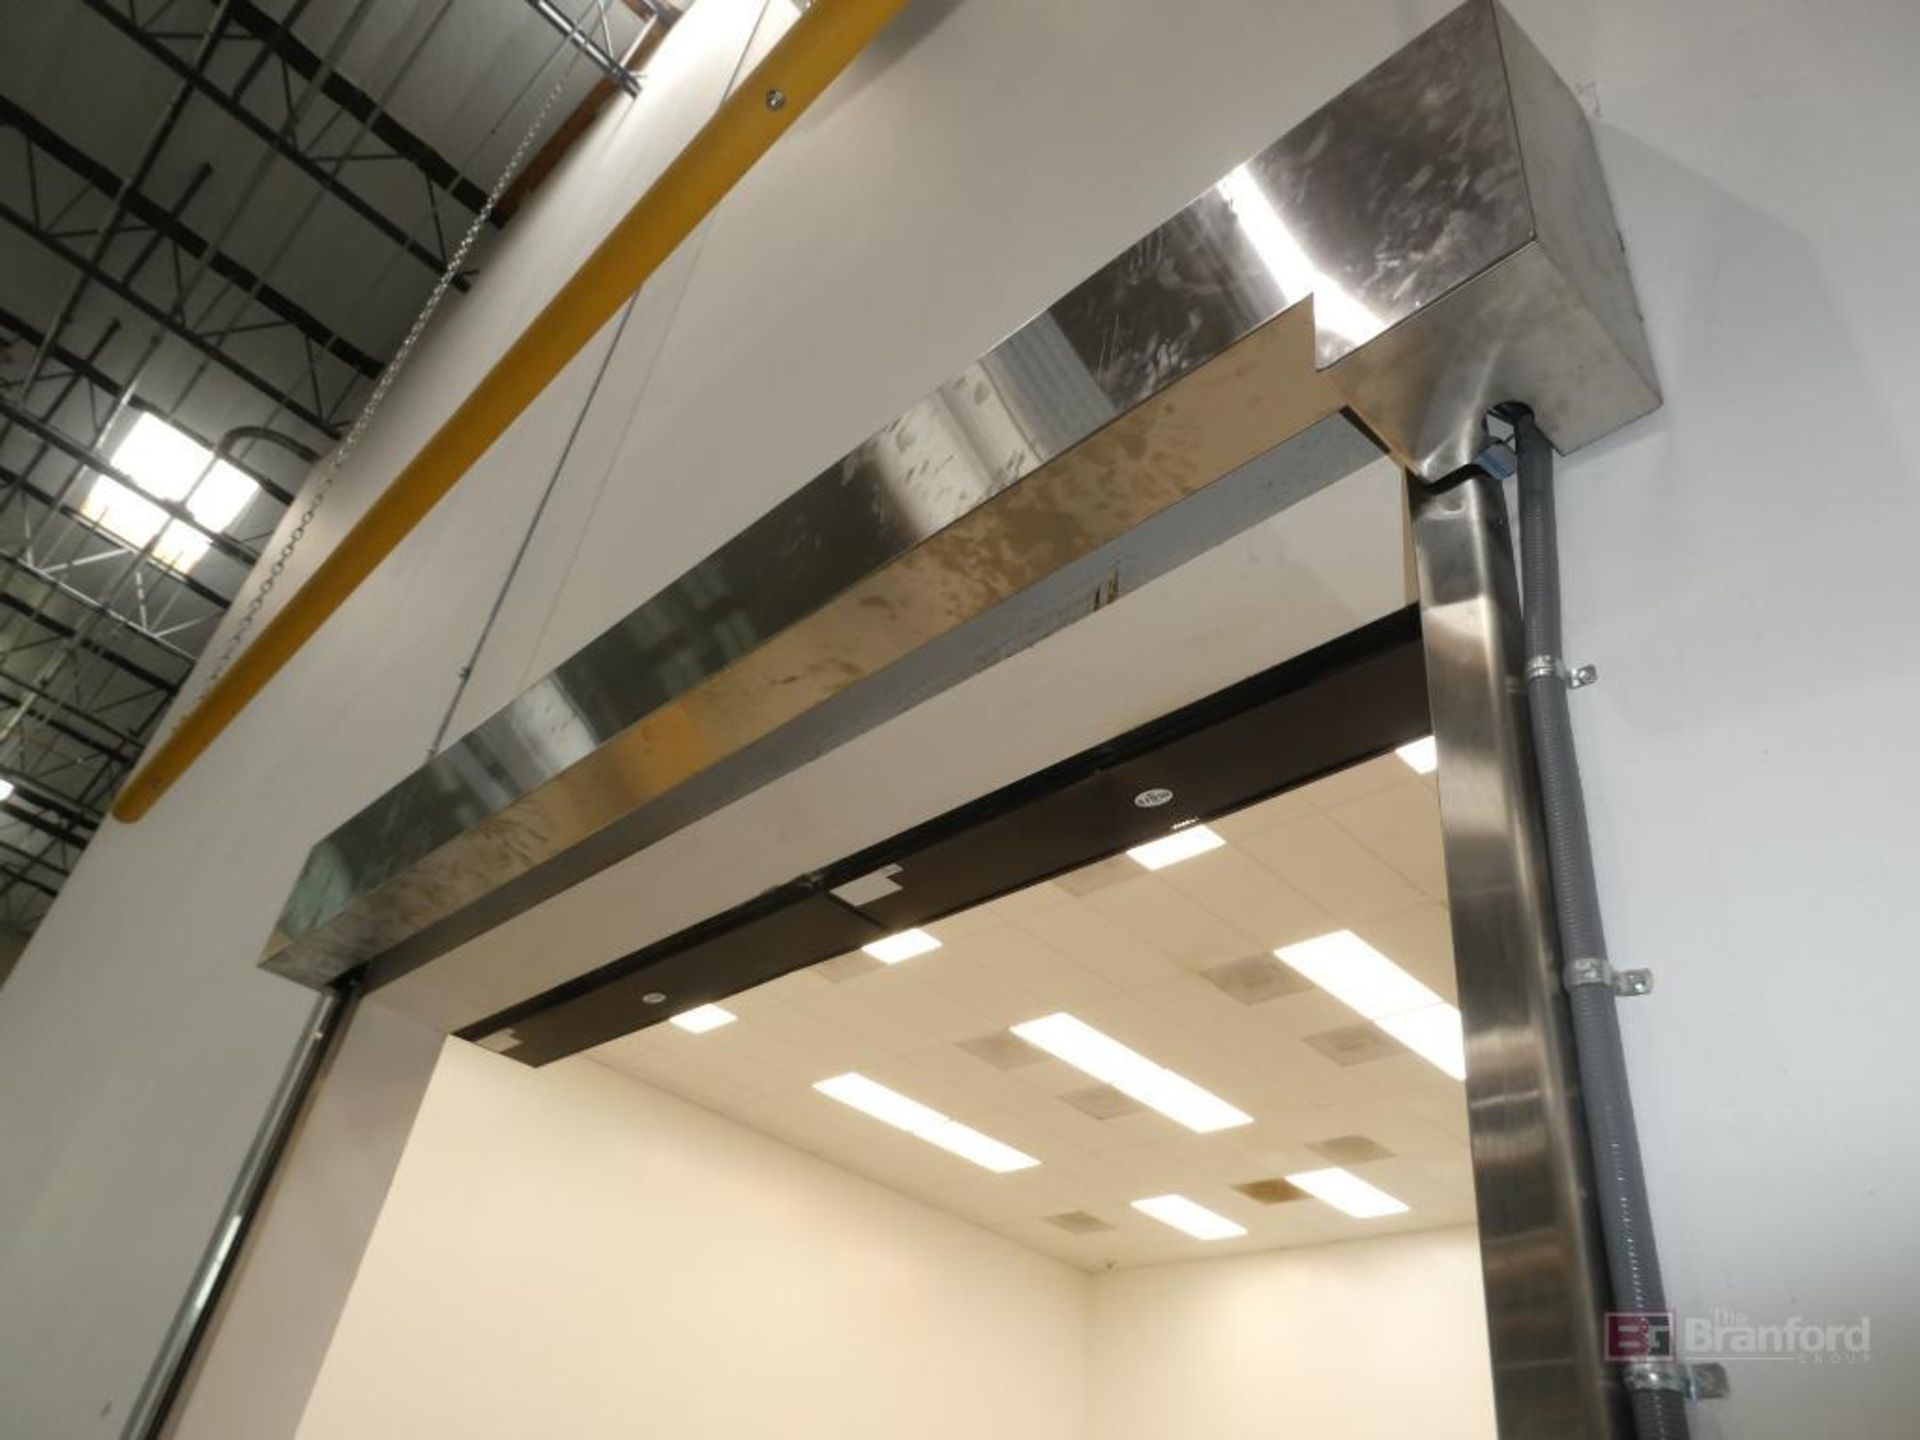 2020 ASI Doors Inc. Model 415, Automatic High Speed Roll Up Doors - Image 5 of 6